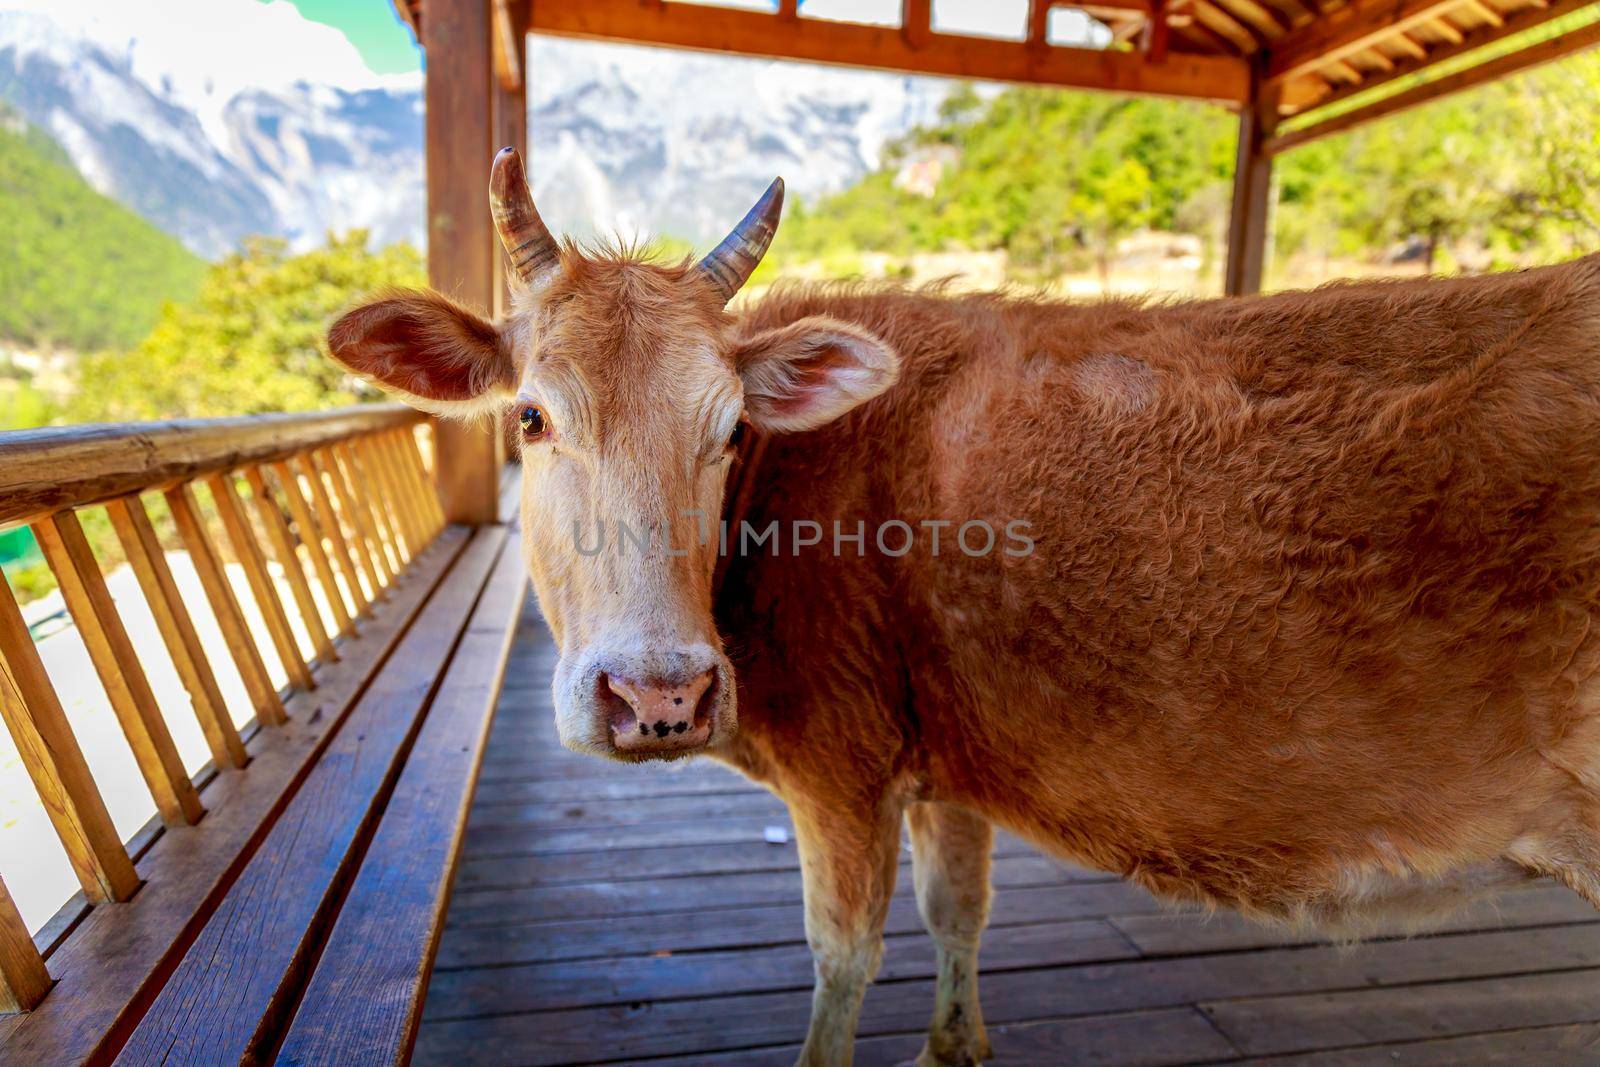 Farm cow rest under shaded arbor, Lijiang, Yunnan province